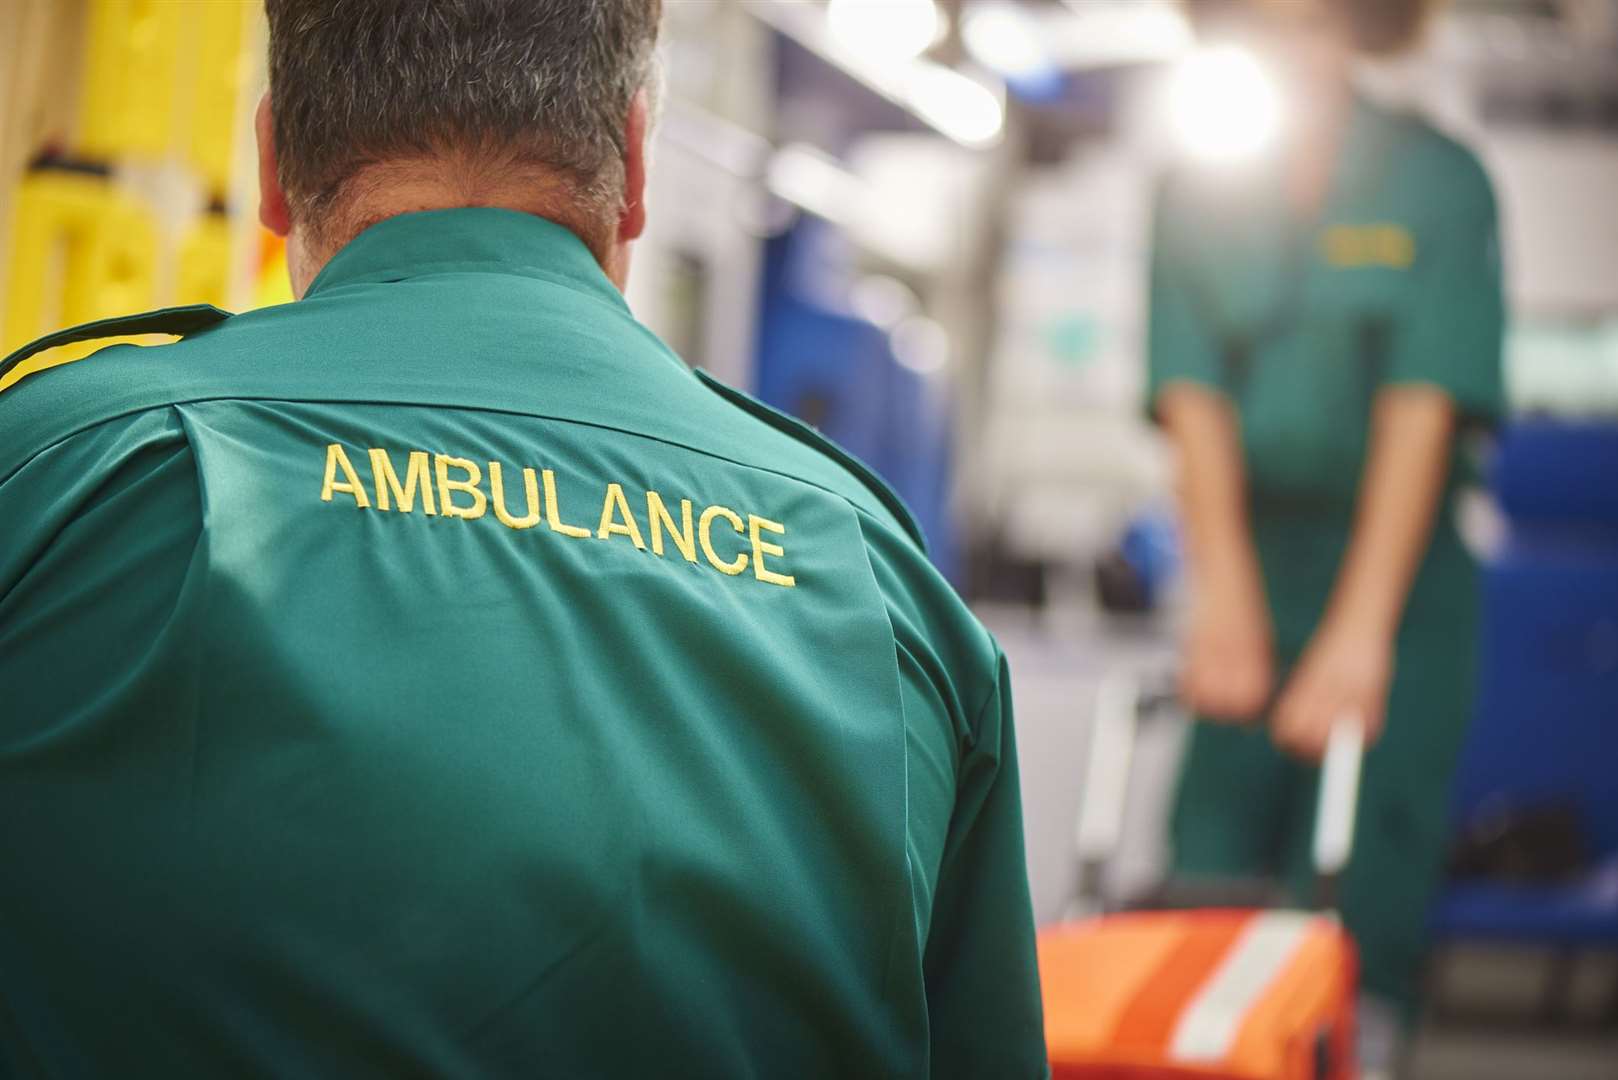 Ambulance services say delays in offloading patients from hospital are part of the problem